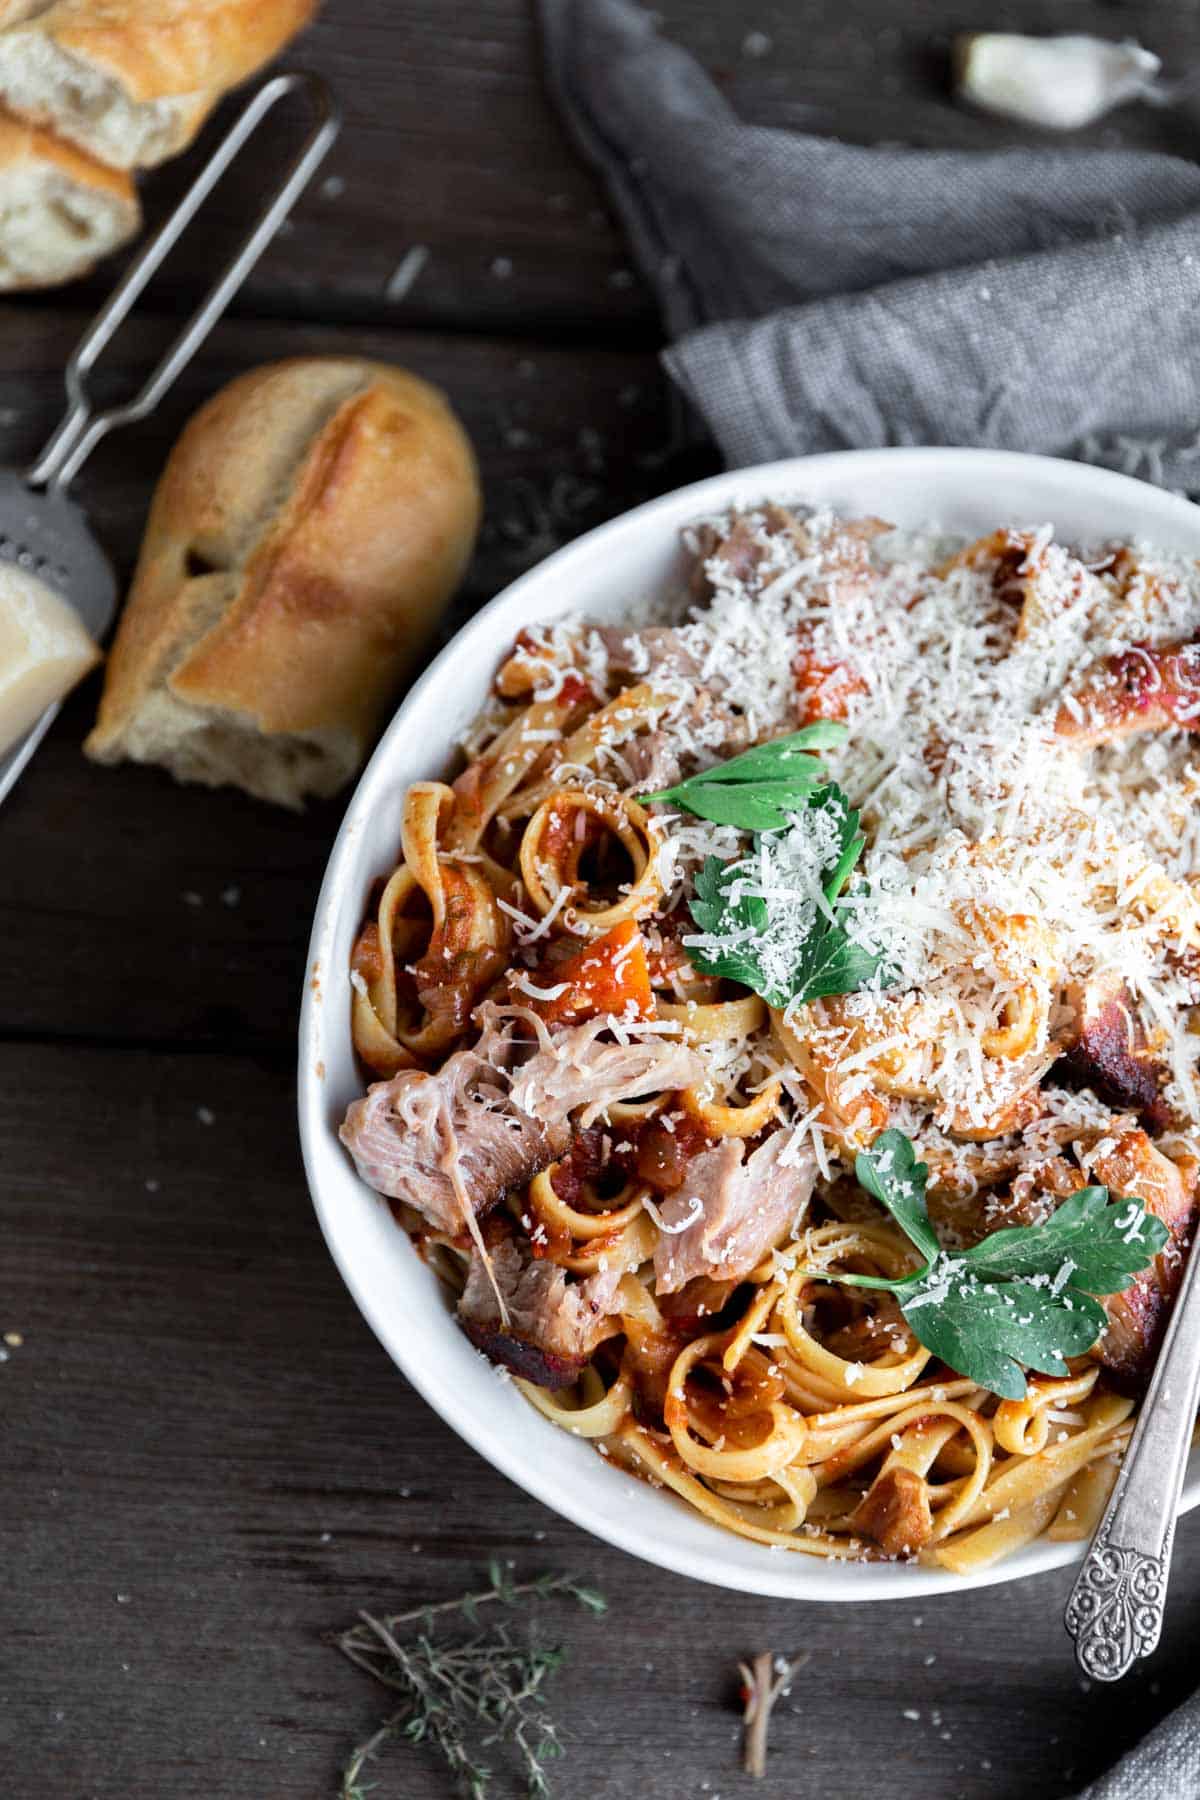 Pork Sugo mixed with fettuccini noodles, parmesan cheese and basil in a bowl.